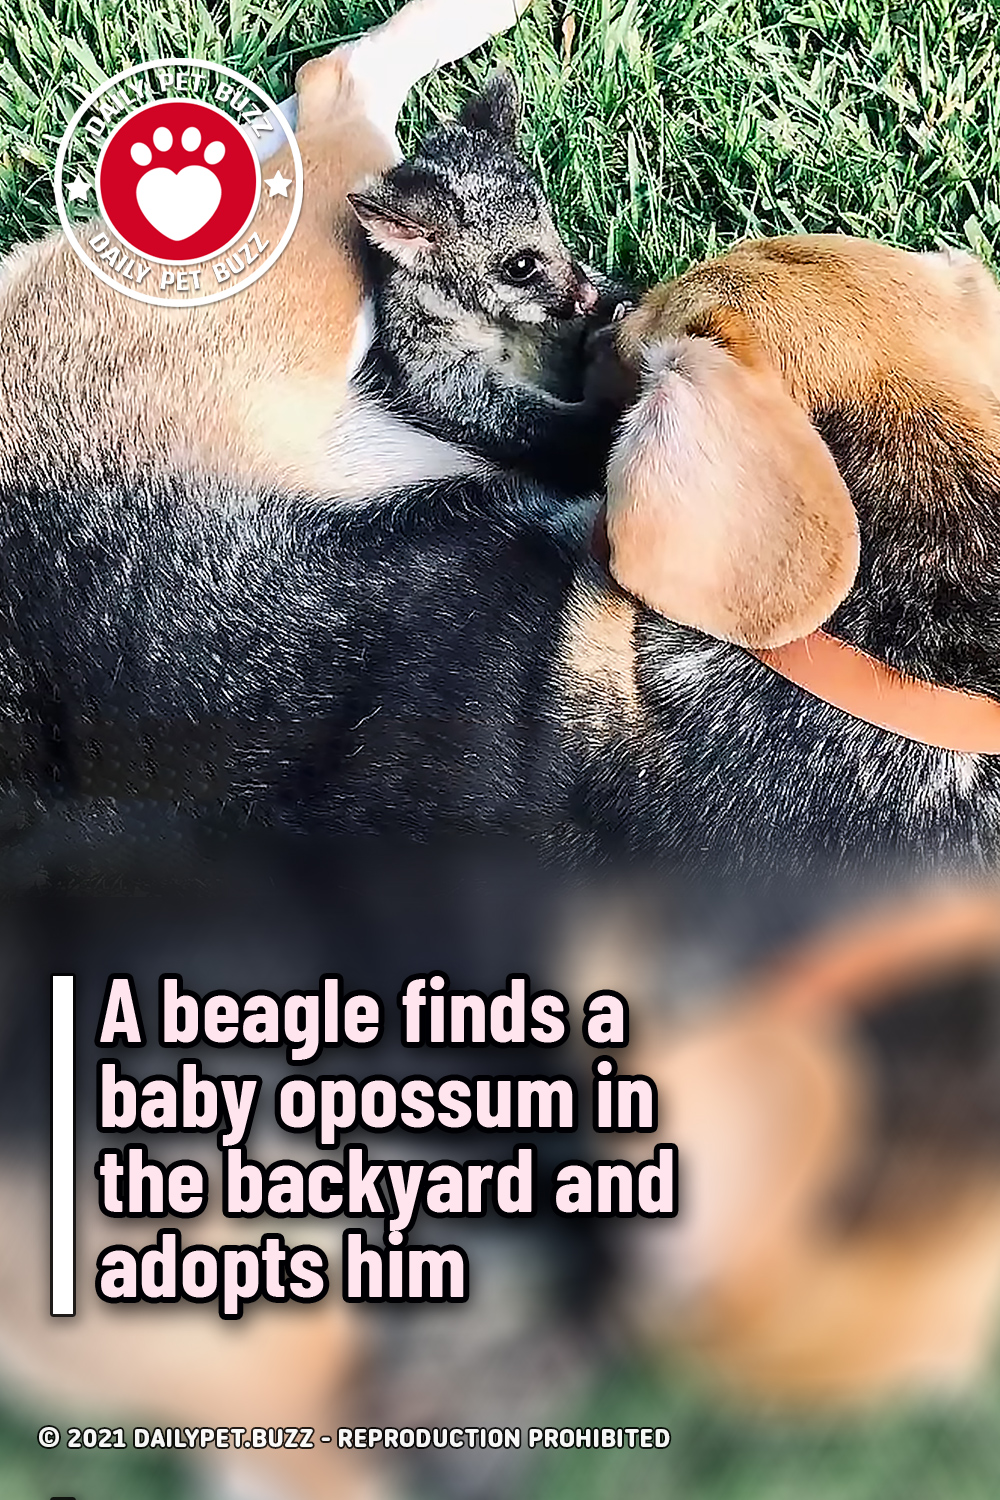 A beagle finds a baby opossum in the backyard and adopts him